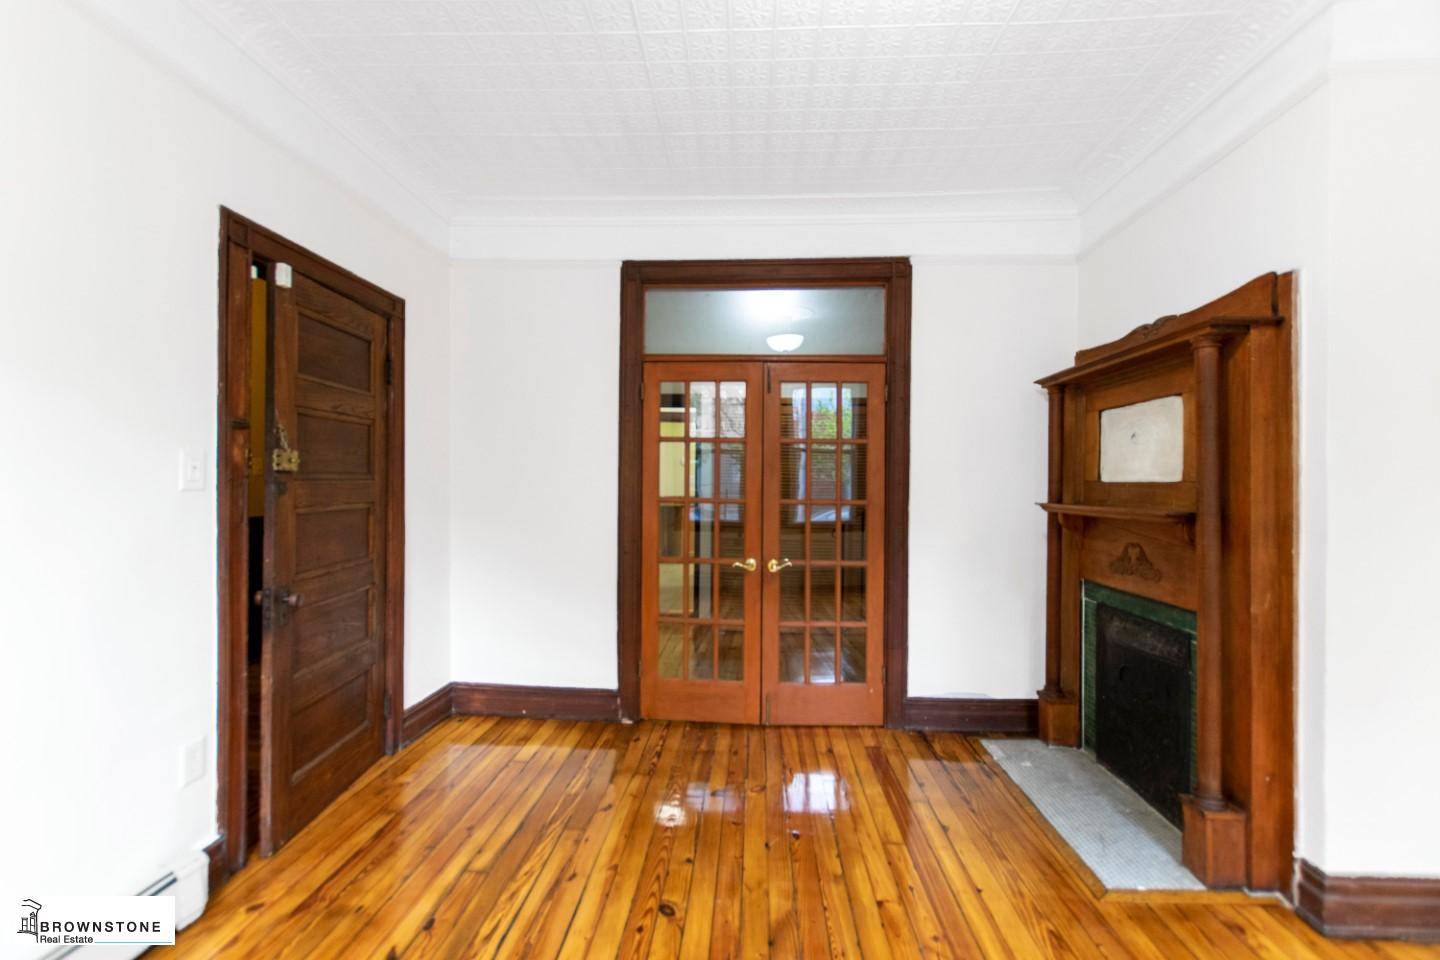 This is lovely three bedroom, two bathroom triplex in Carroll Gardens with a garden.